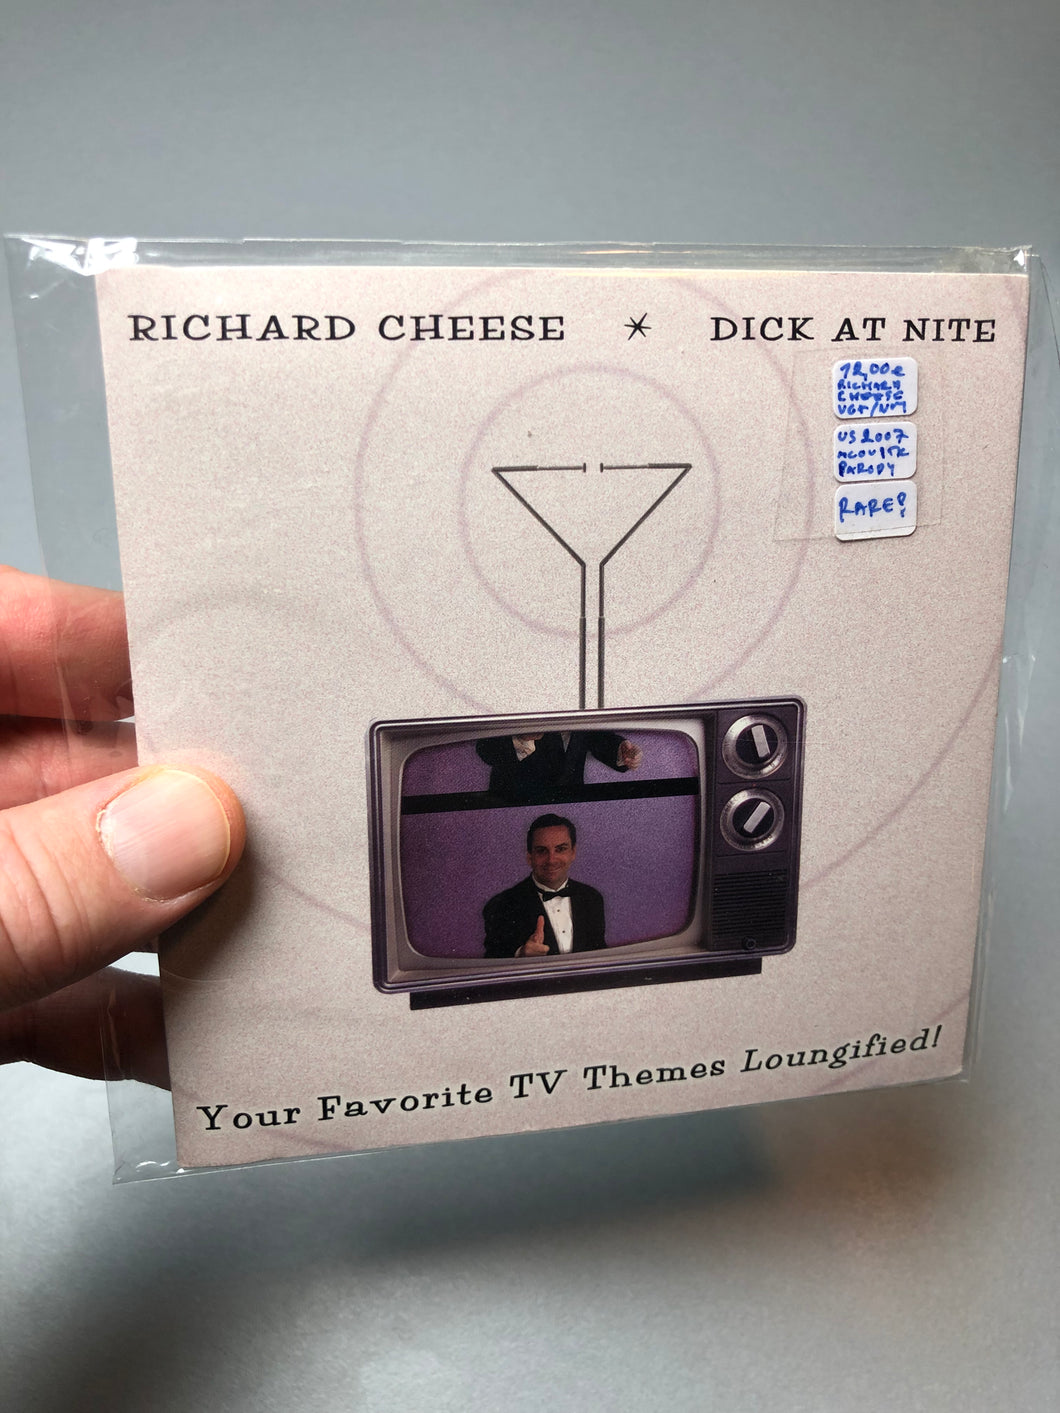 Richard Cheese: Dick At Nite (Your Favorite TV Themes Loungified!), US 2007